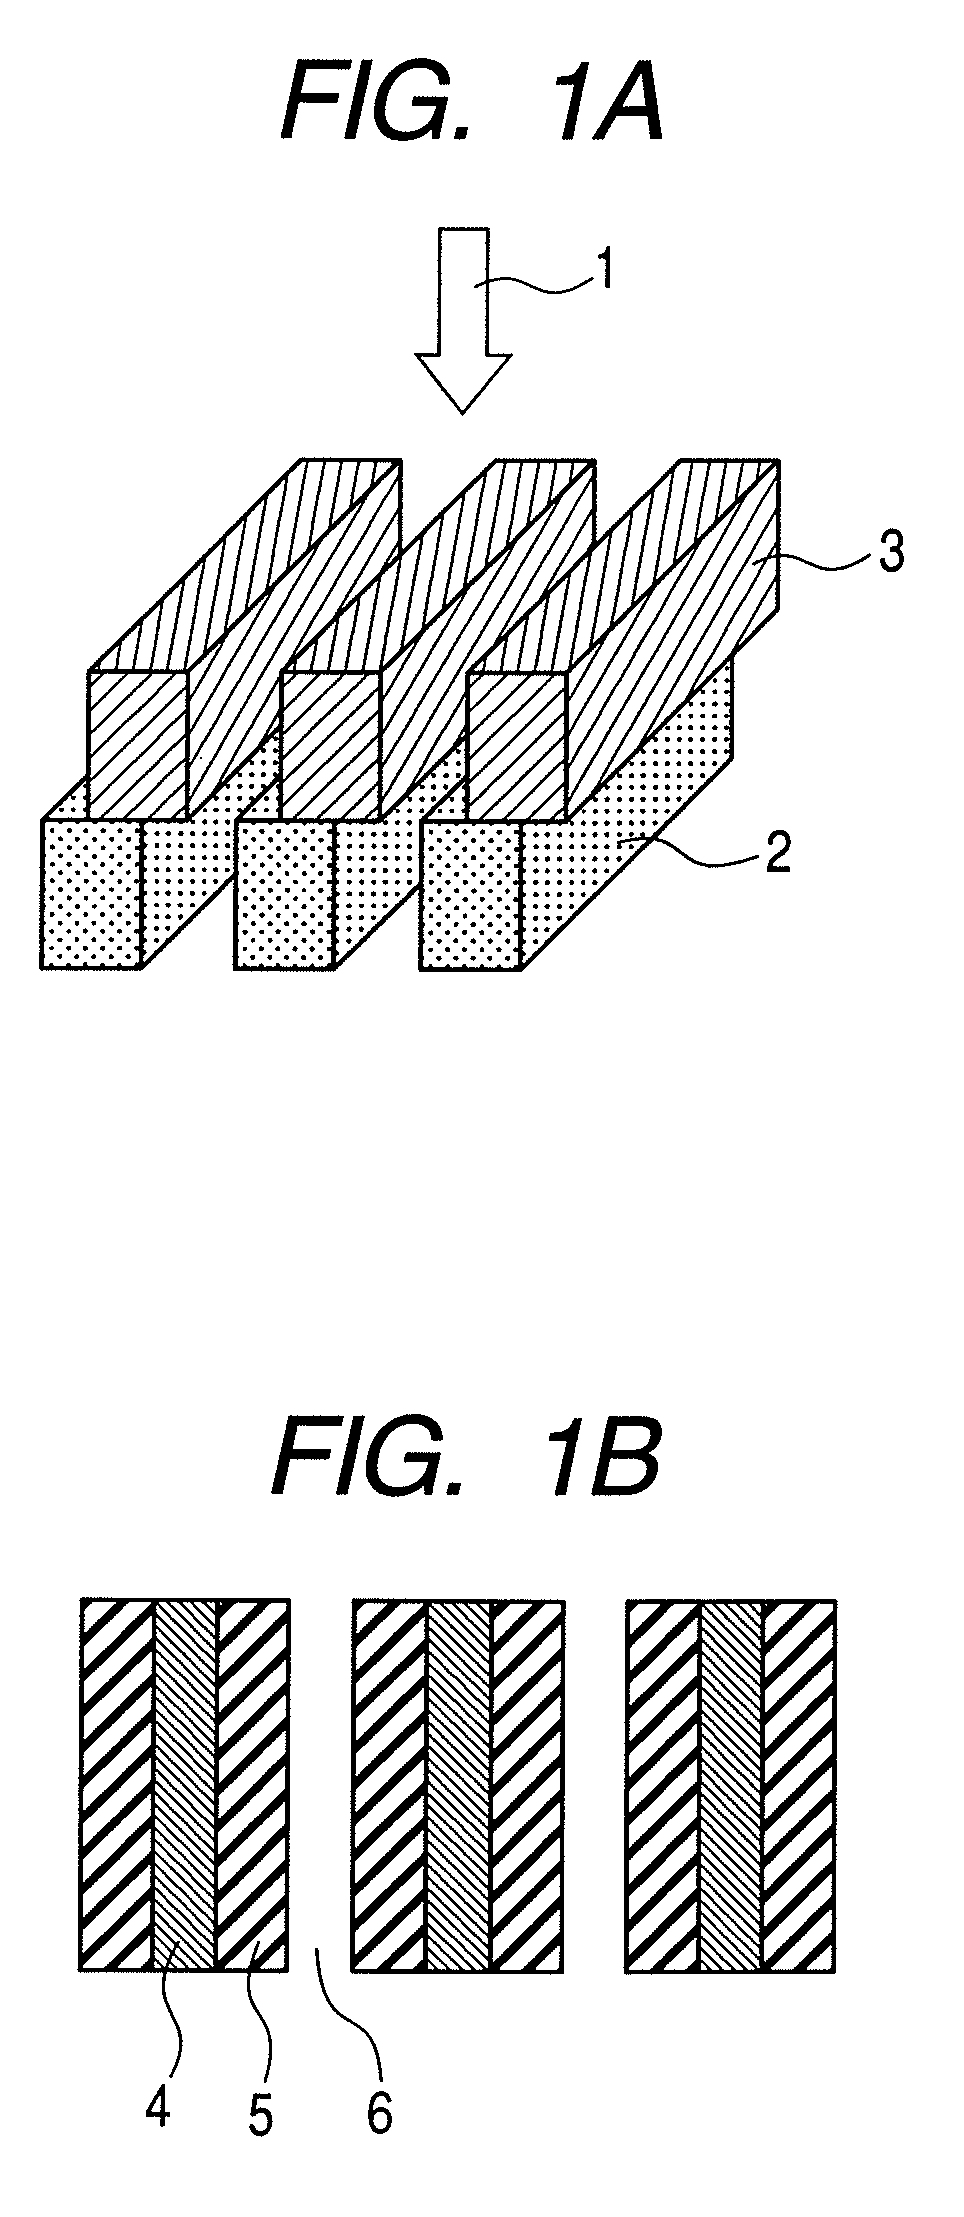 Phase grating used for X-ray phase imaging, imaging apparatus for X-ray phase contrast image using phase grating, and X-ray computed tomography system